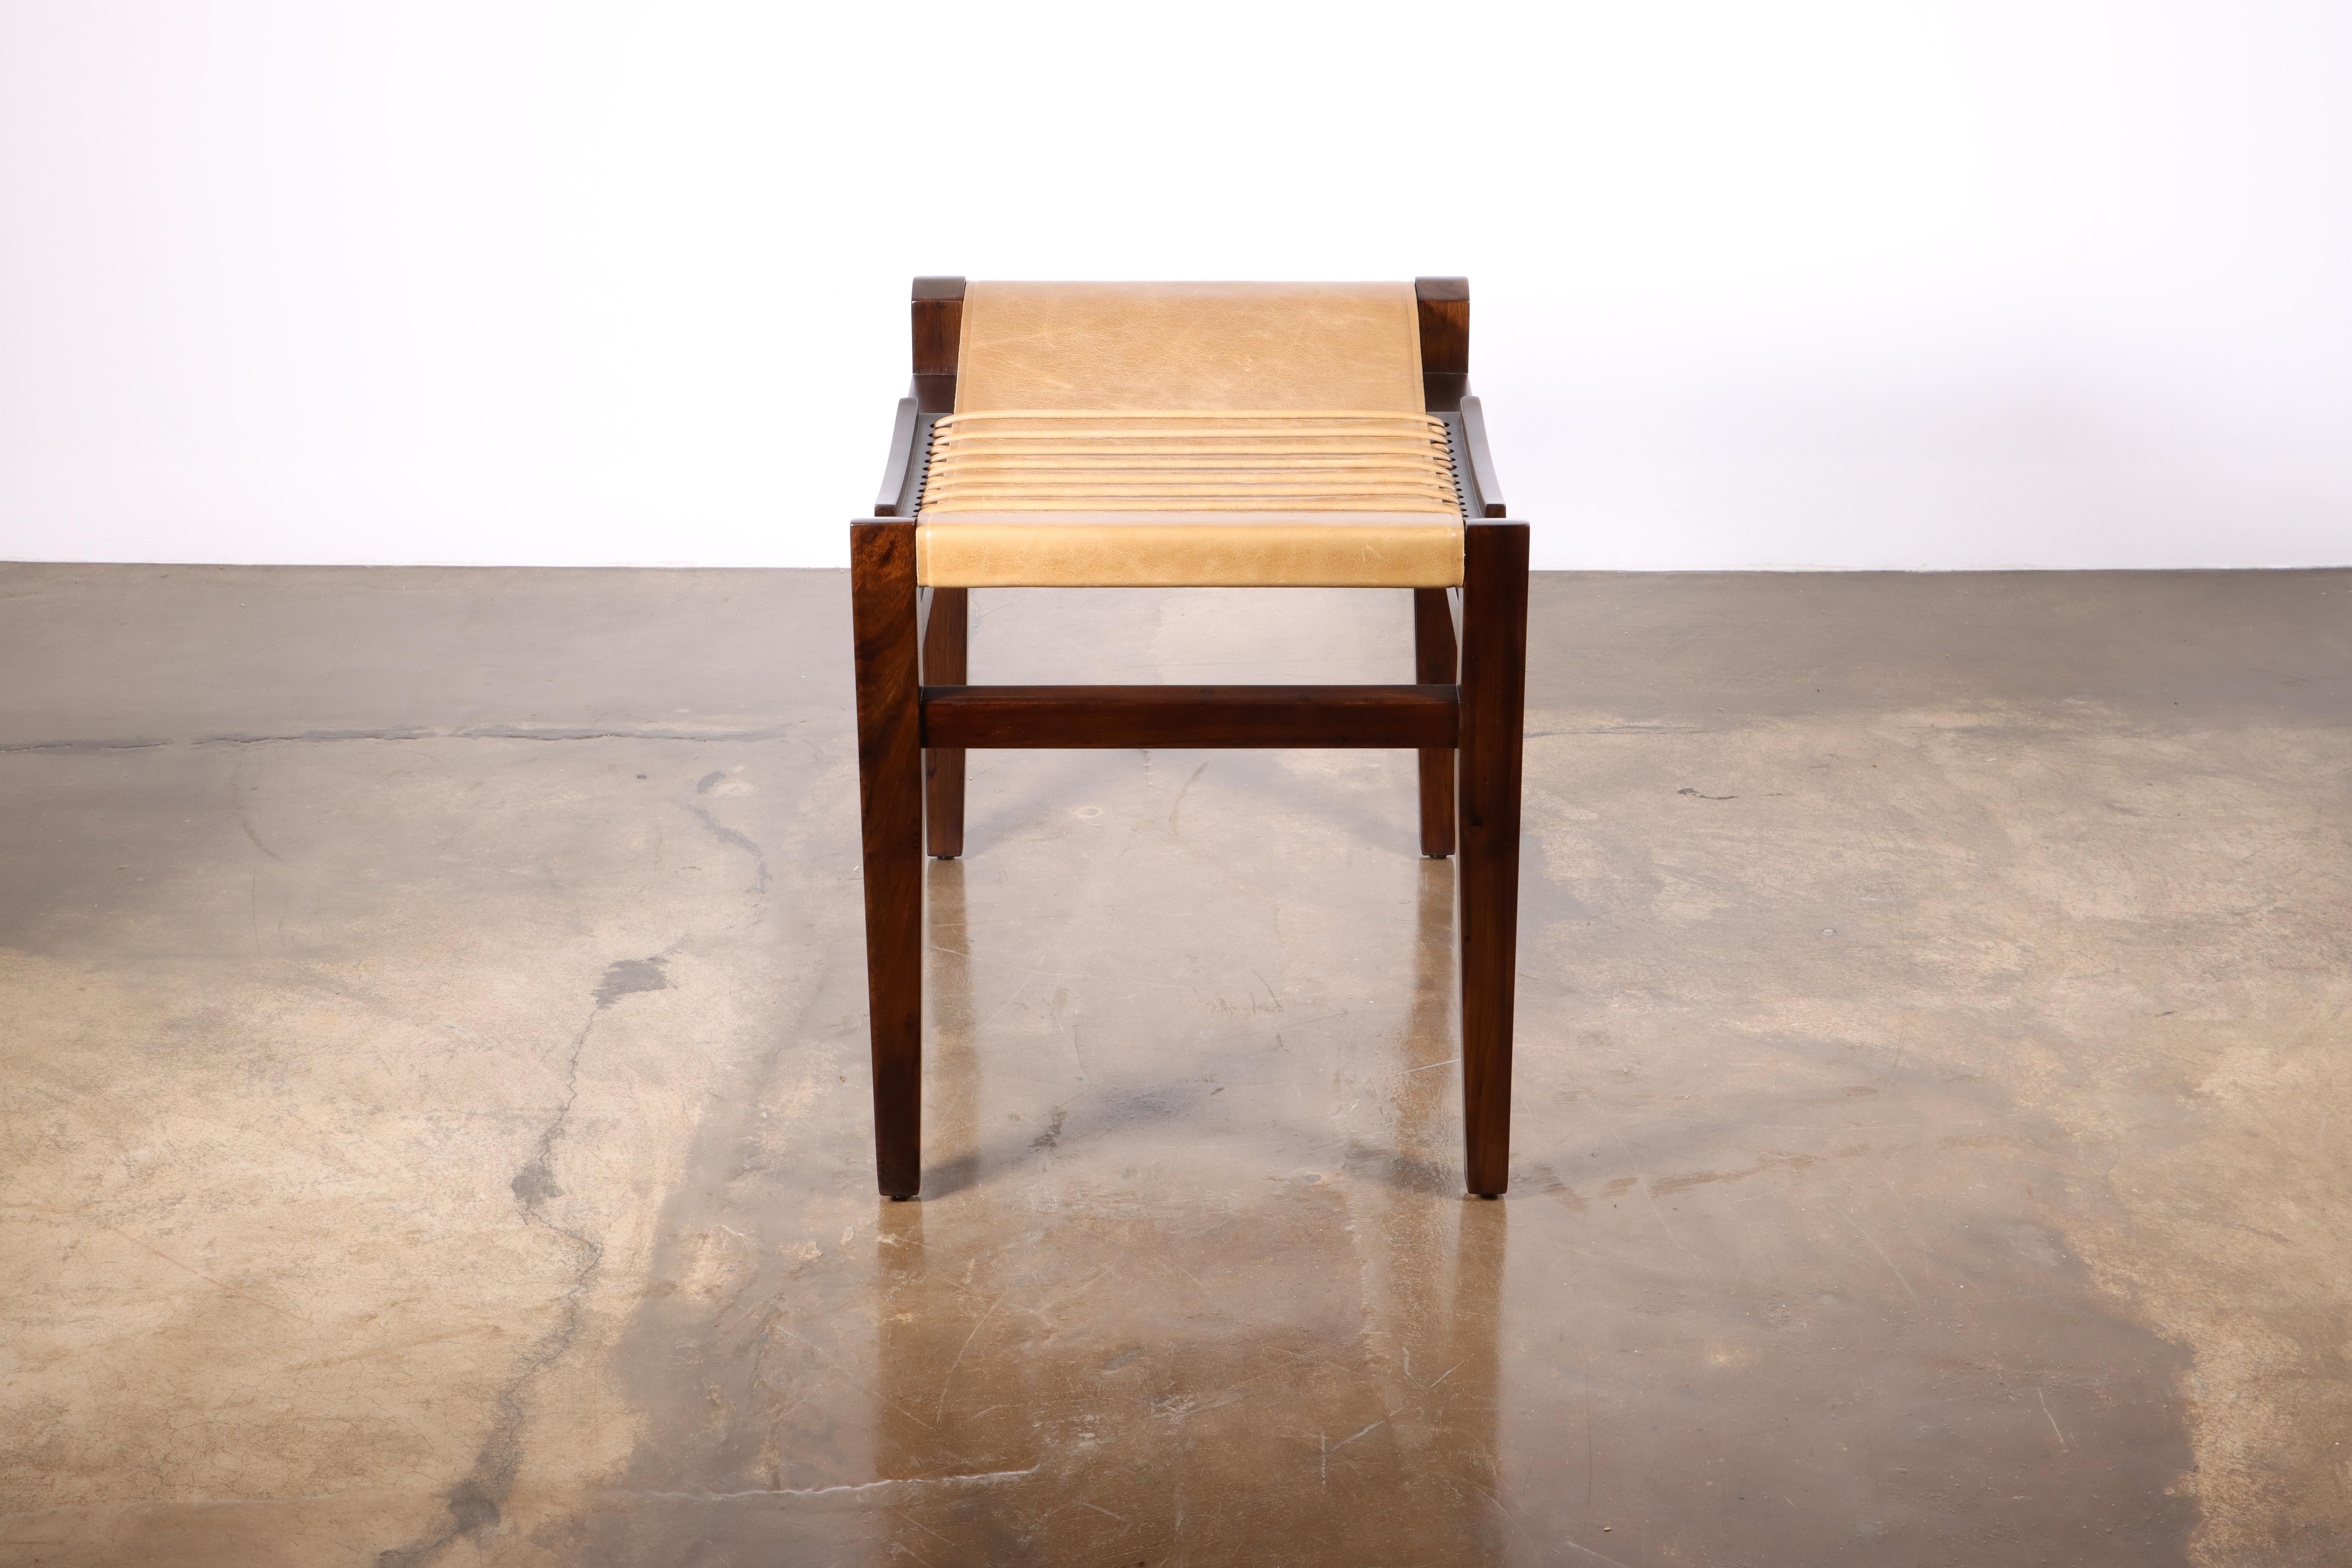 Hand-Crafted Exotic Wood and Leather Stool in Argentine Rosewood by Costantini Design, Luzio For Sale